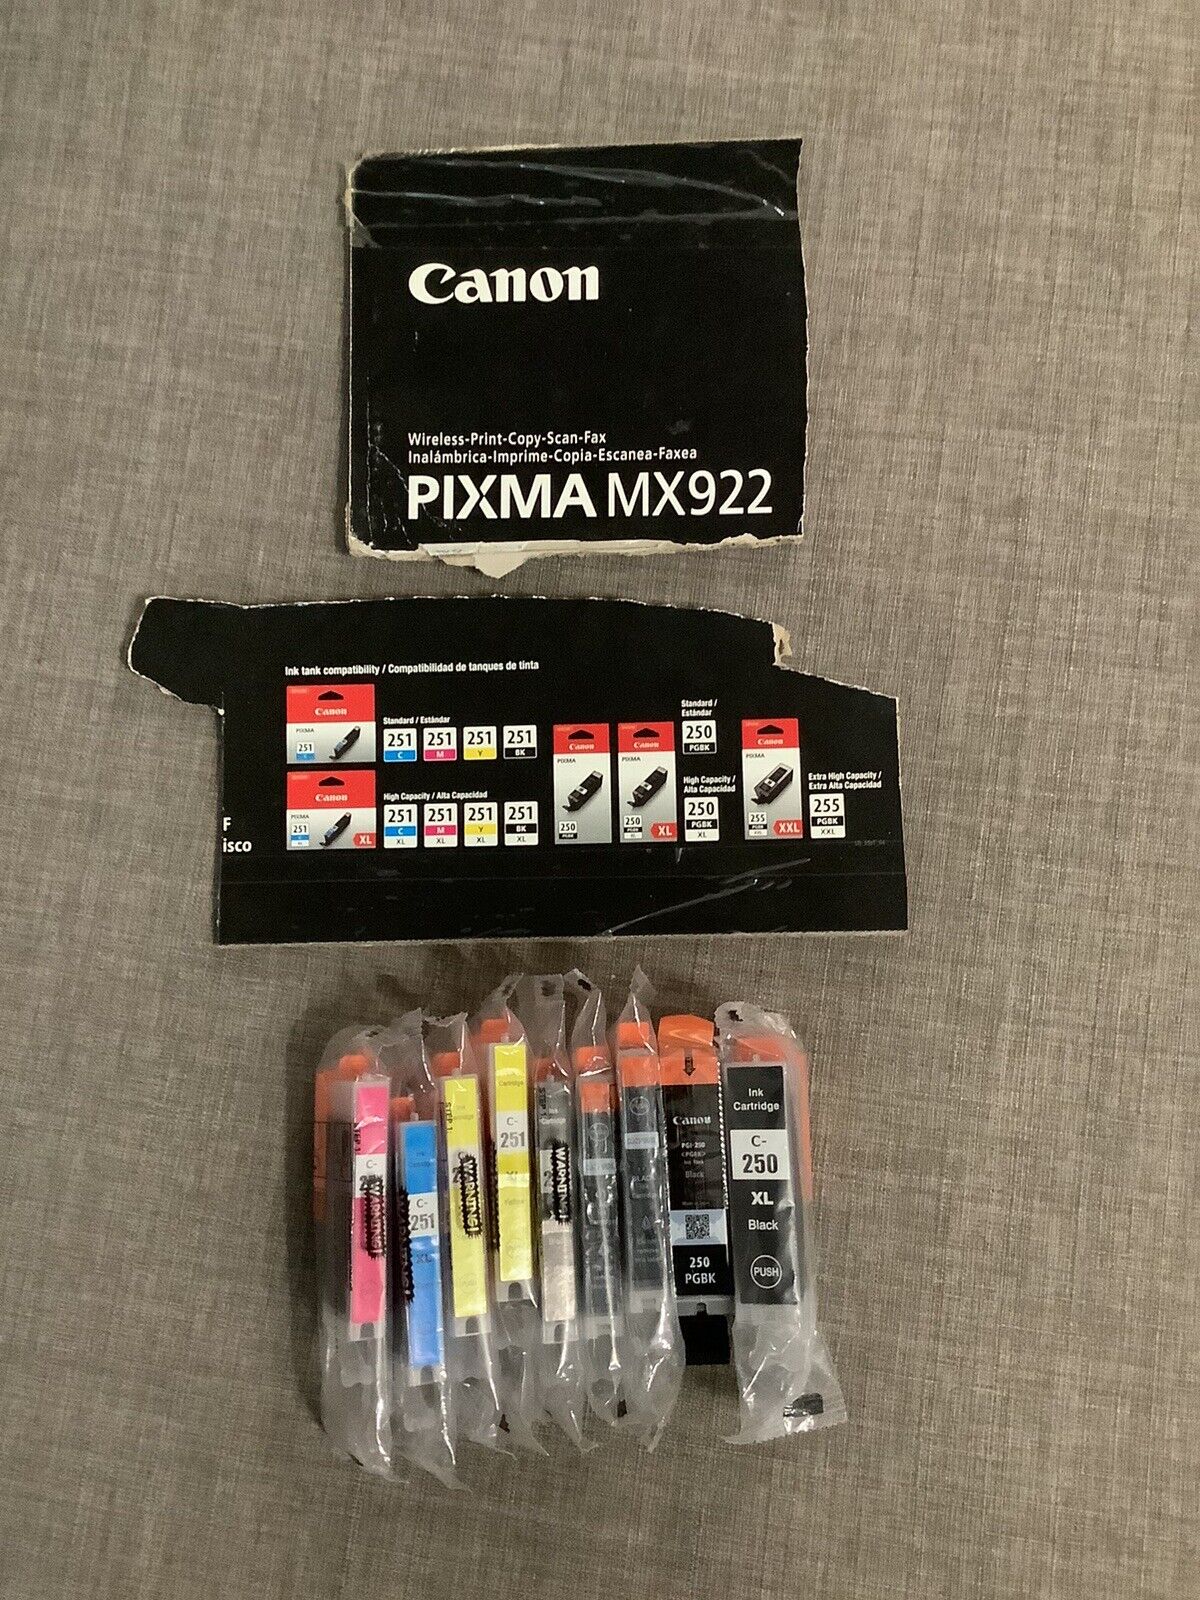 9 Ink Cartridges Packaged Brand New Canon Pixma MX922 Printer